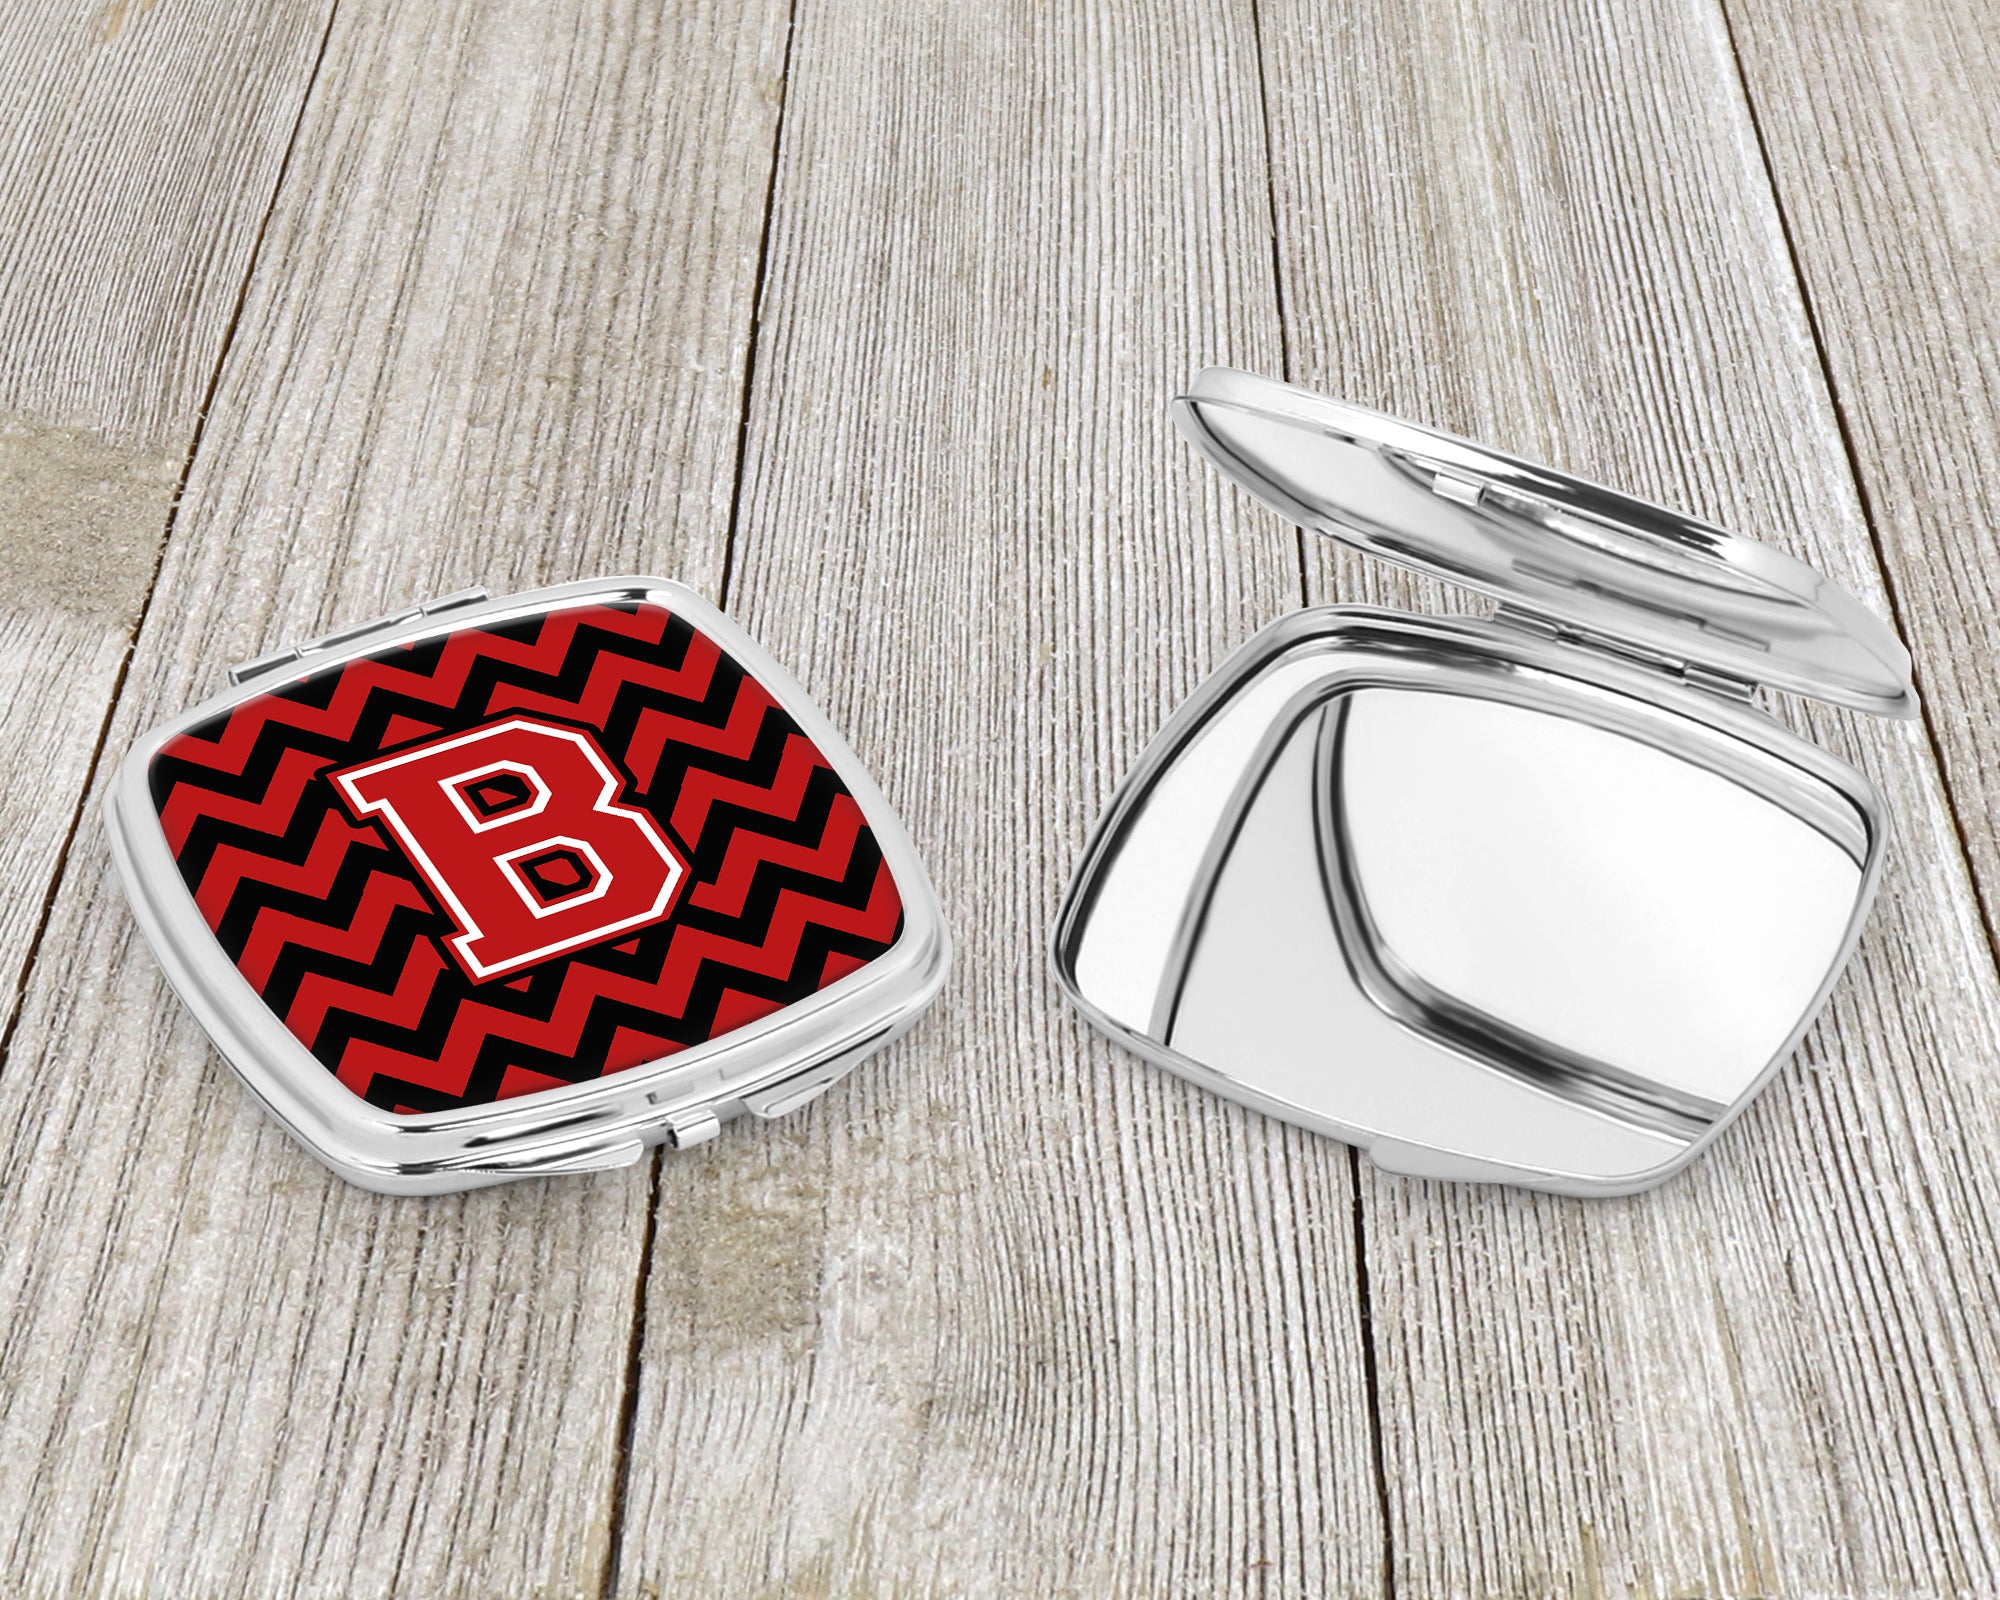 Letter B Chevron Black and Red   Compact Mirror CJ1047-BSCM